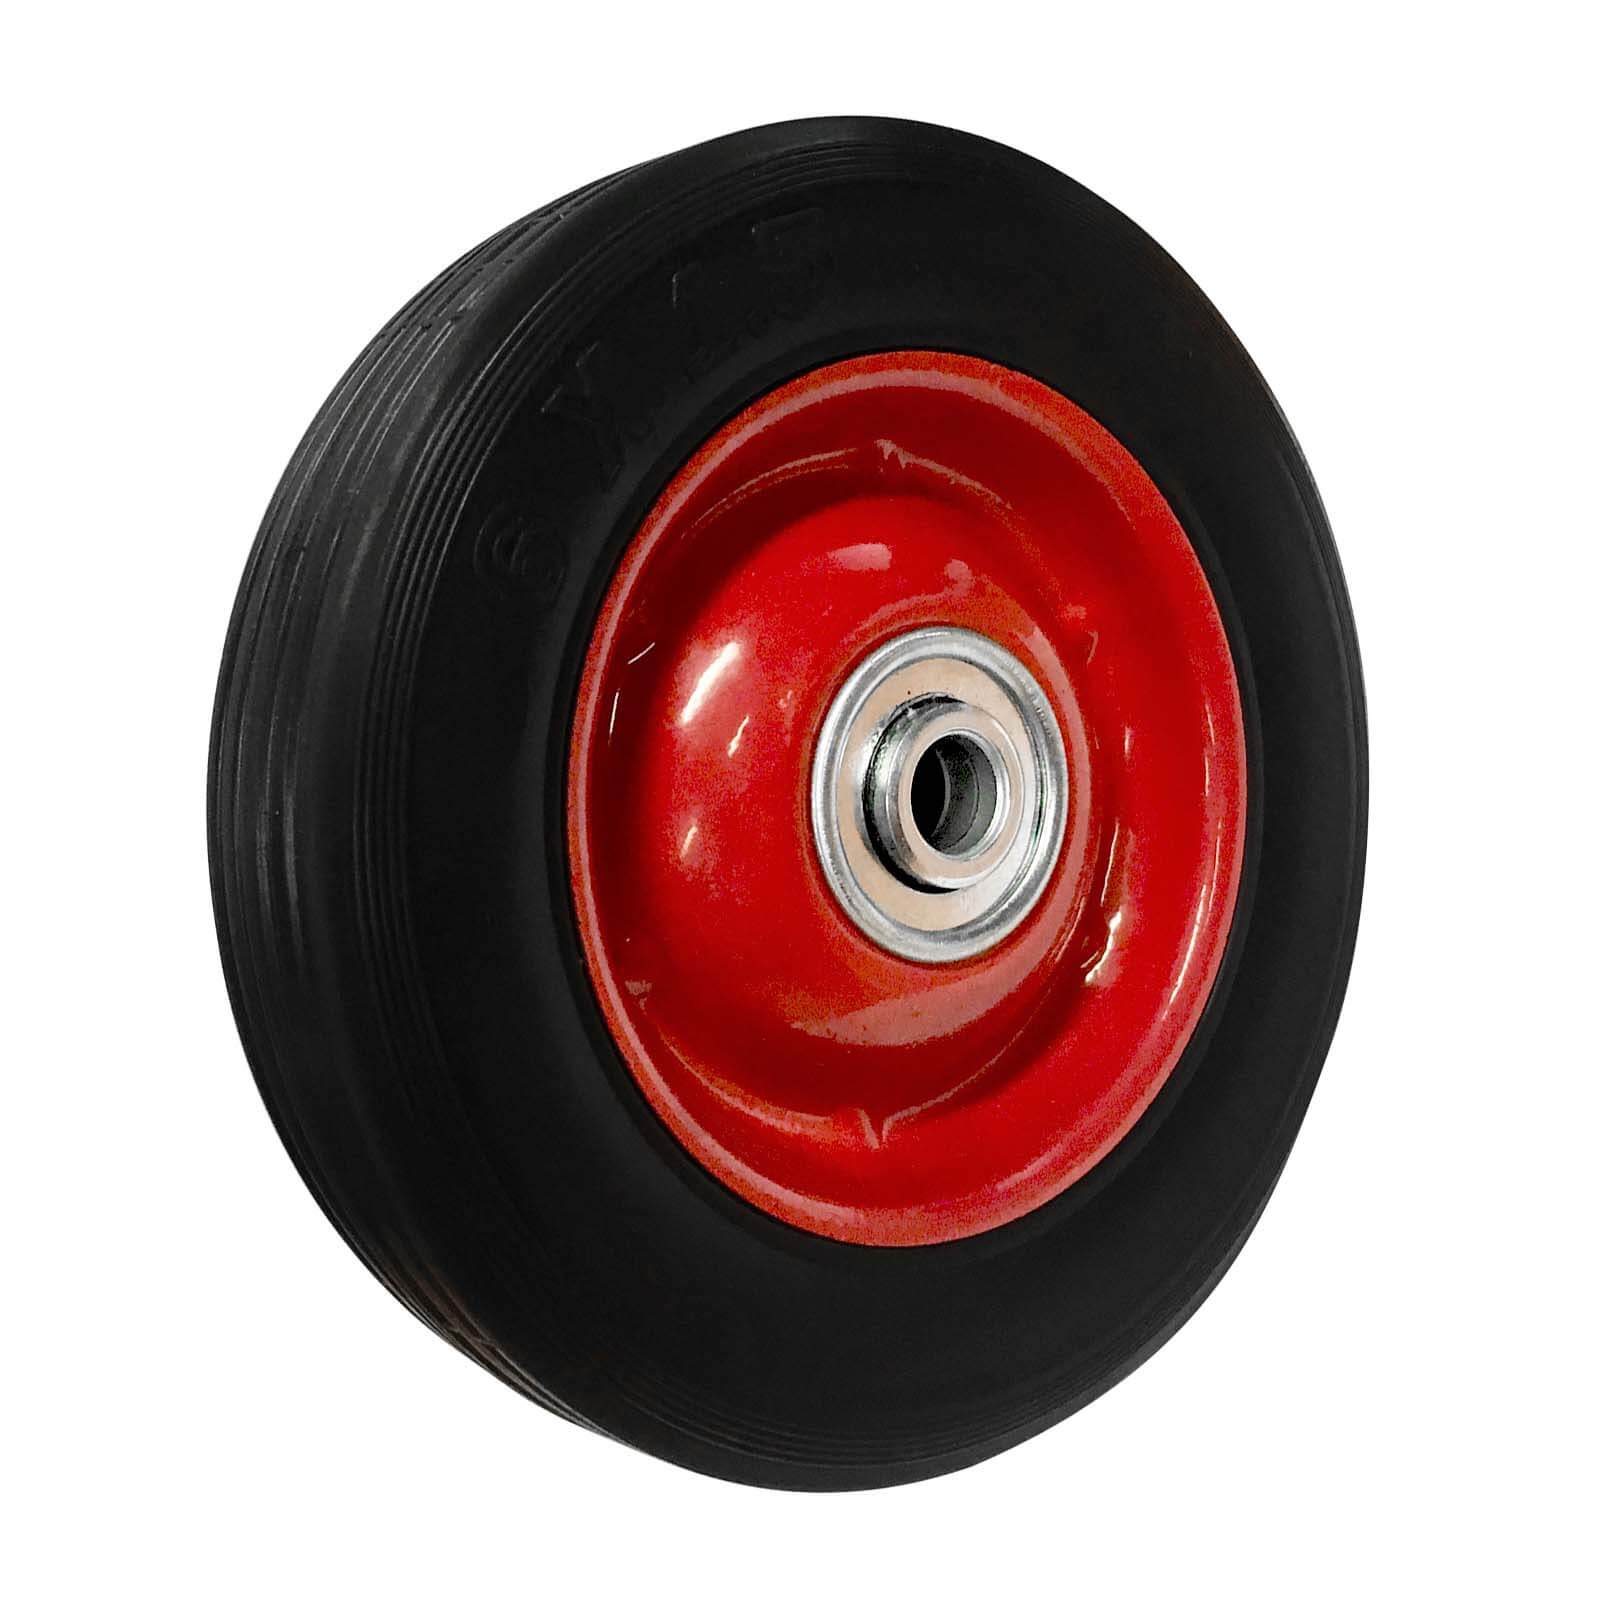 Metal Wheel with Rubber Tyre - Red - 150mm